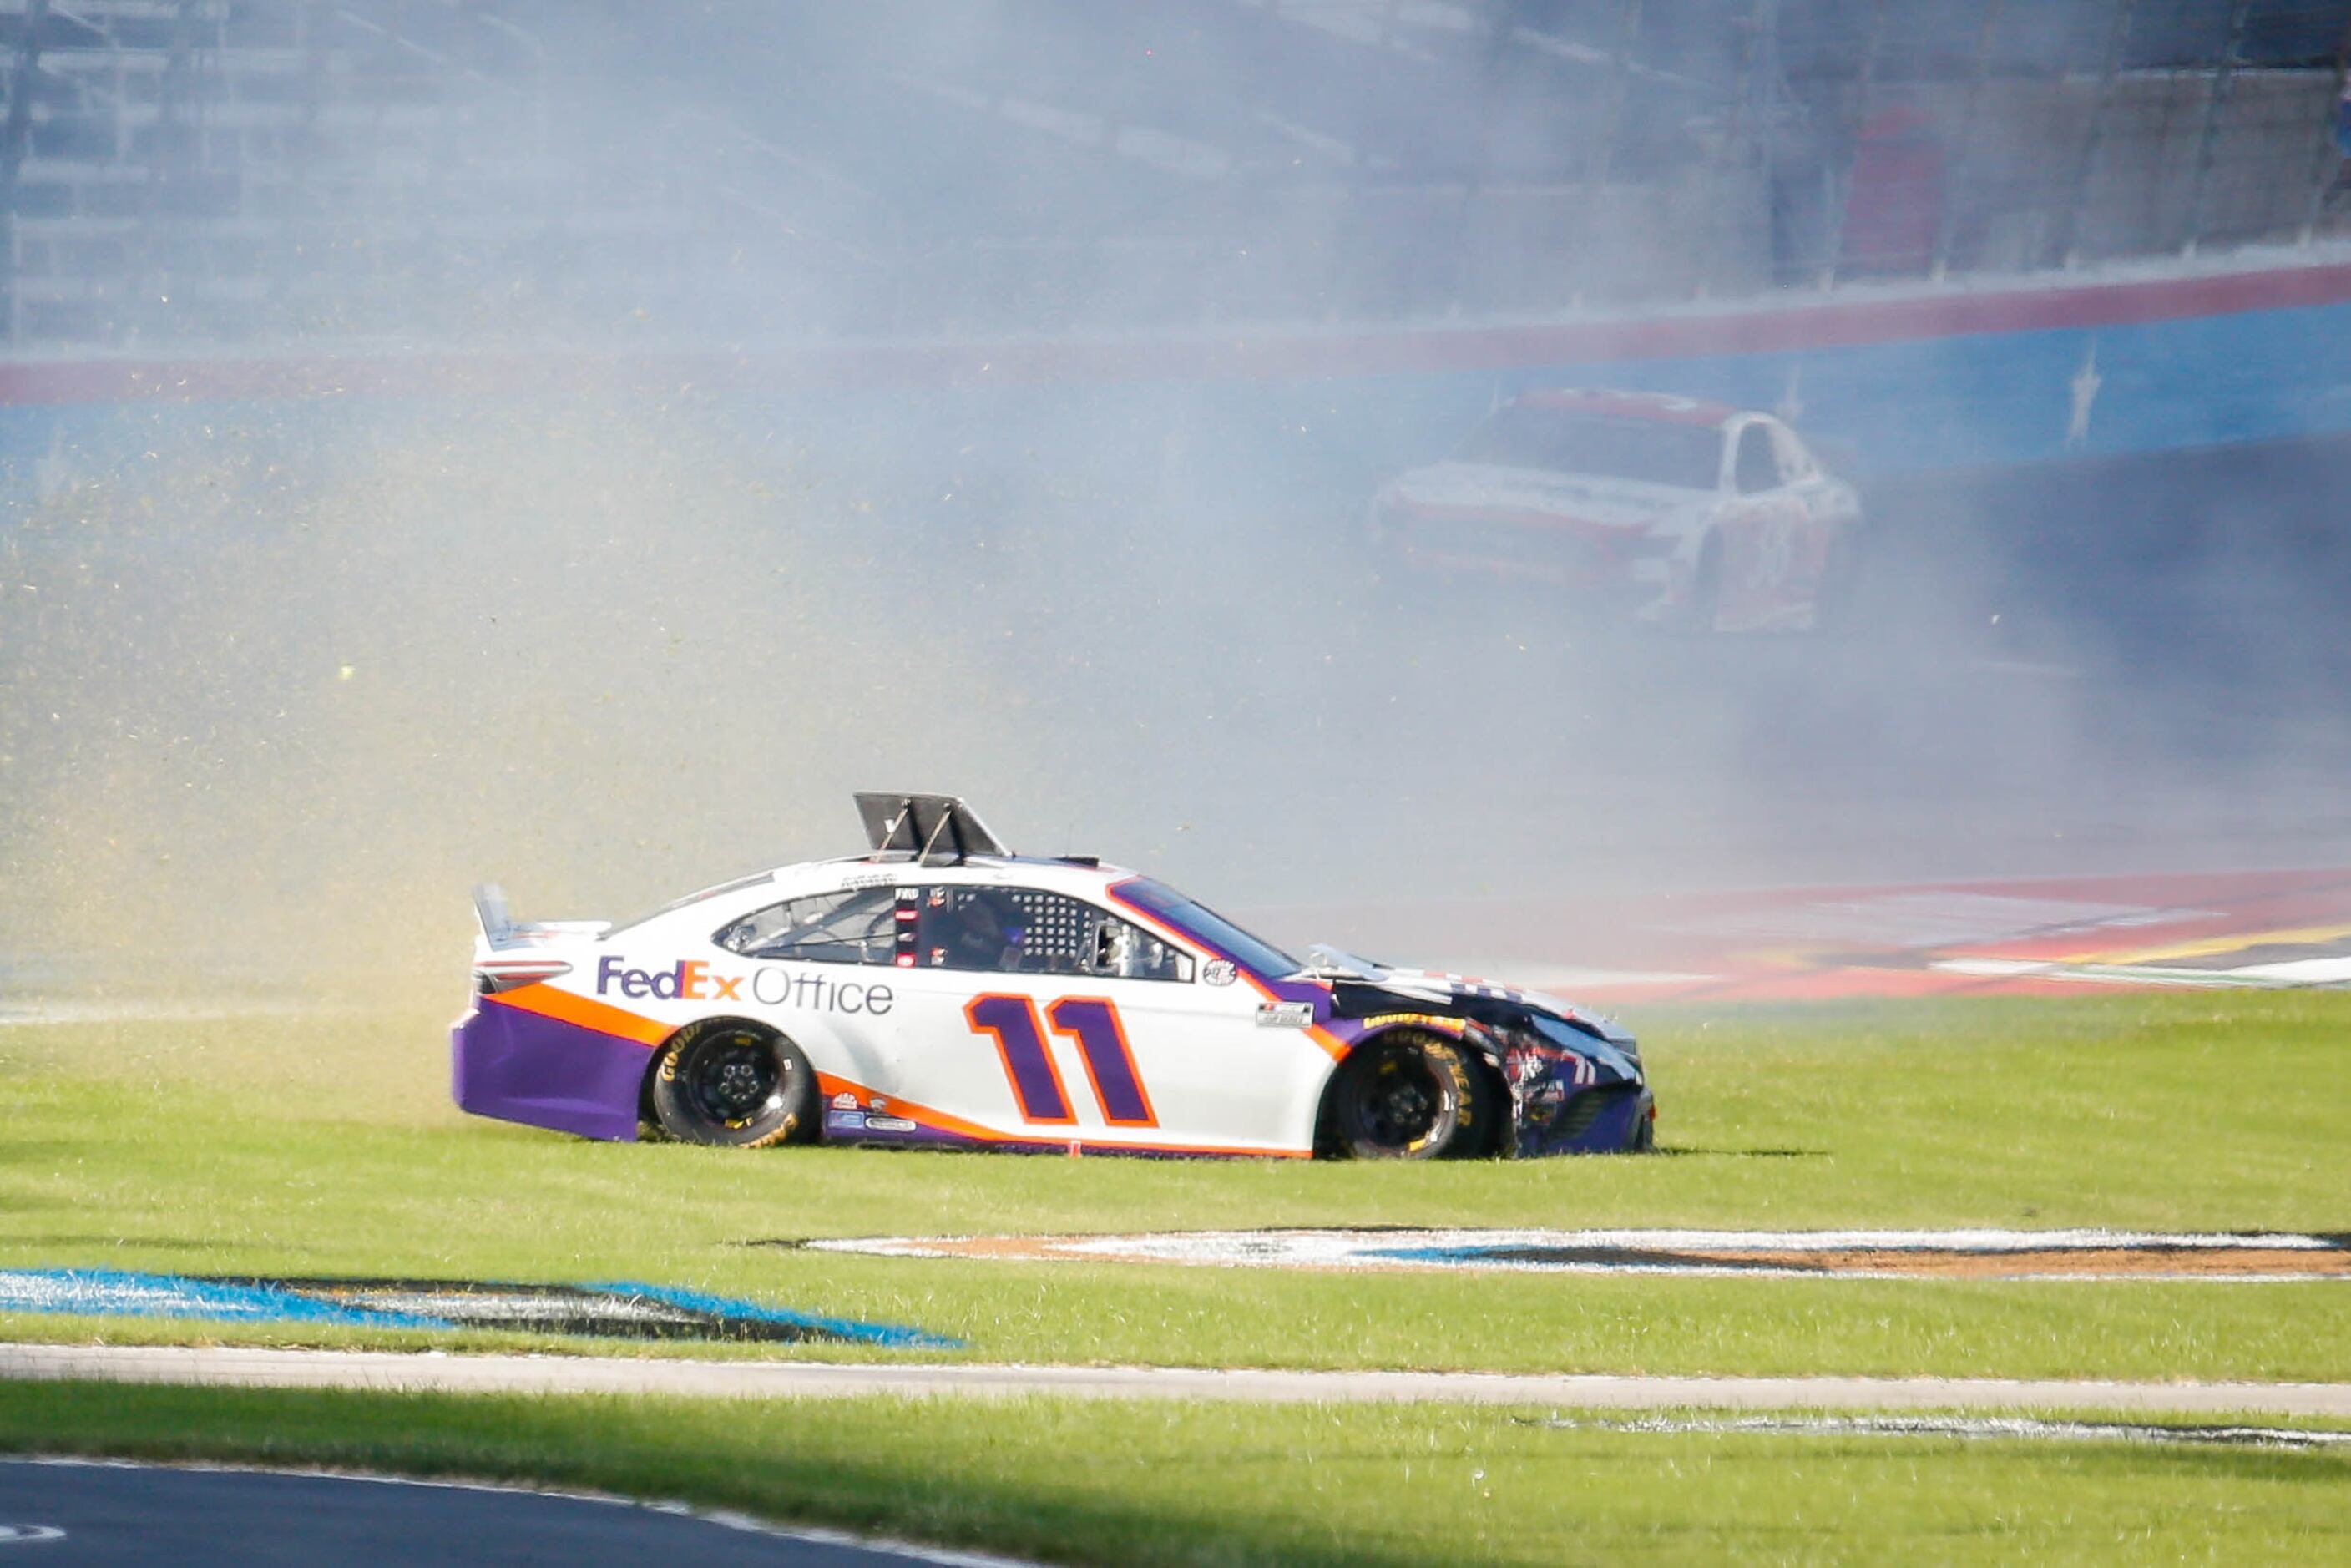 Denny Hamlin (No. 11) slides onto the grass after crashing during the NASCAR Cup Series...